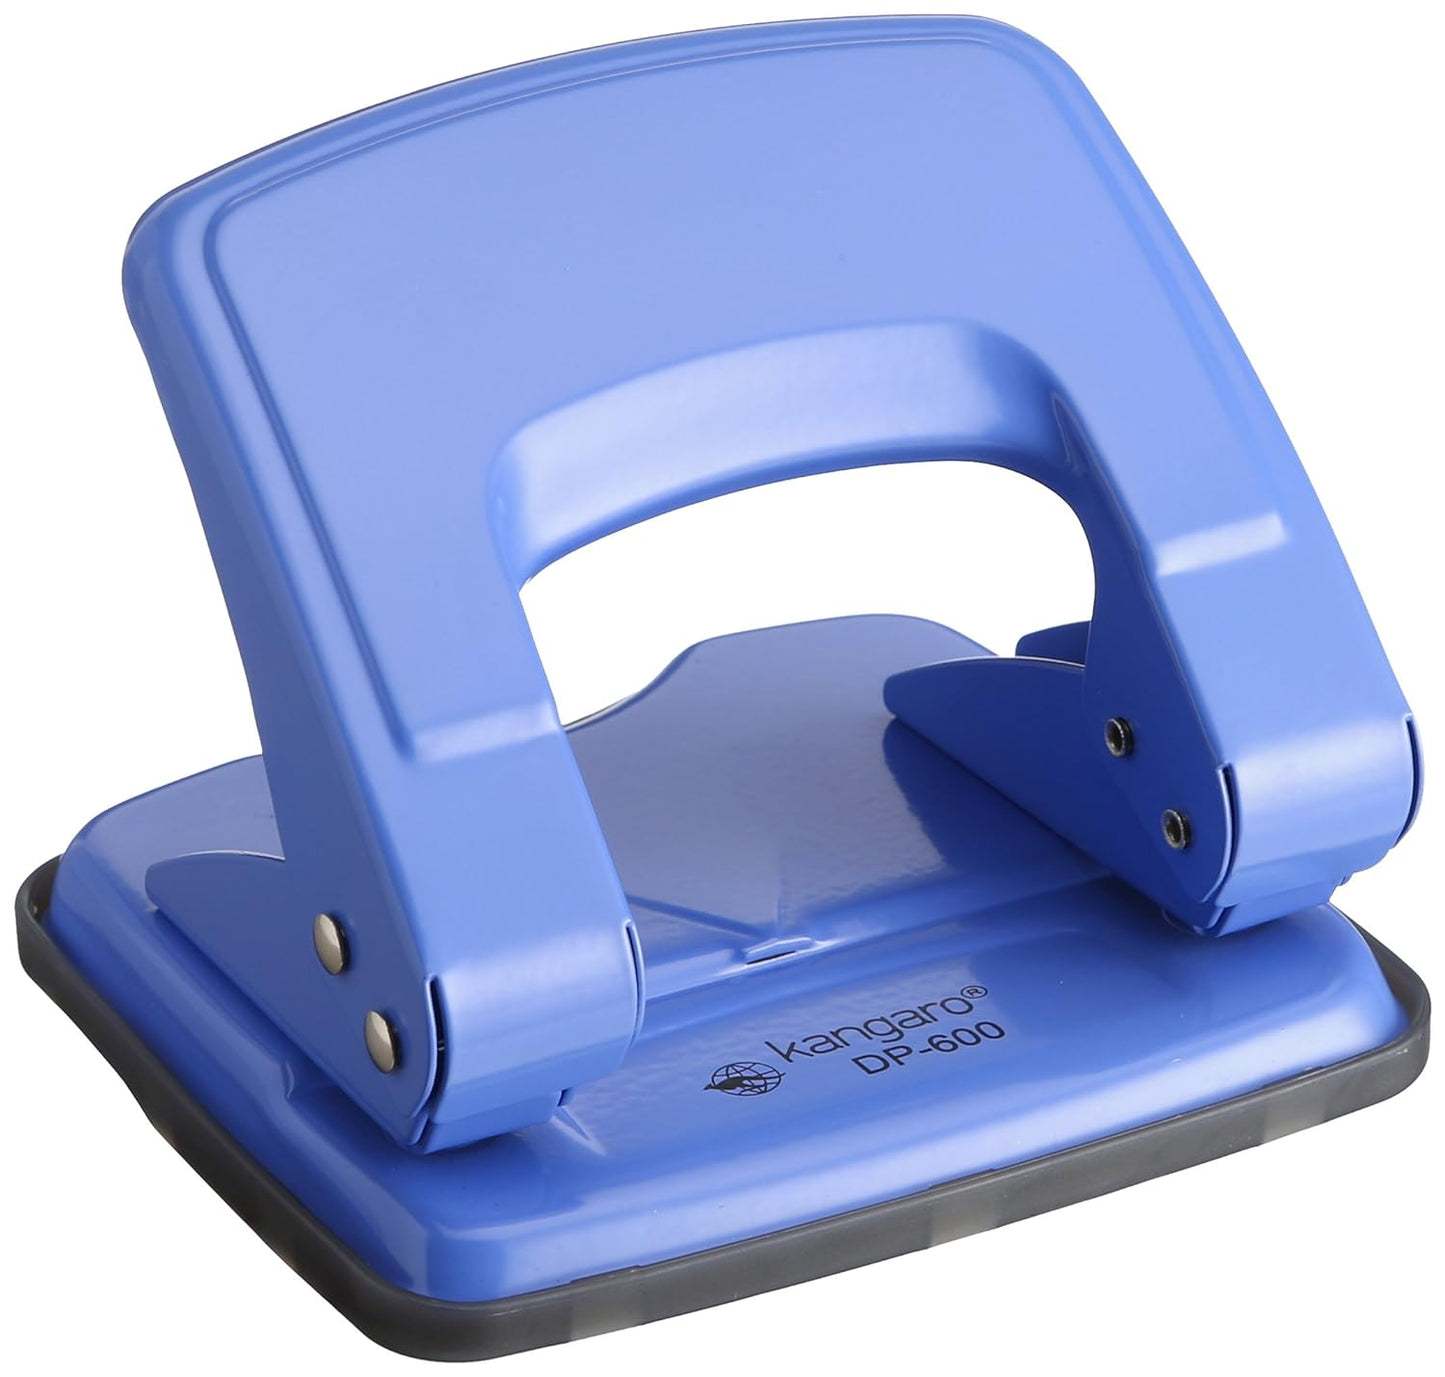 Kangaro Desk Essentials DP-600 2 Hole Metal Classic Medium Paper Punch | Removable Chip Tray With Durable Steel Consecution | Color May Vary, Pack Of 1